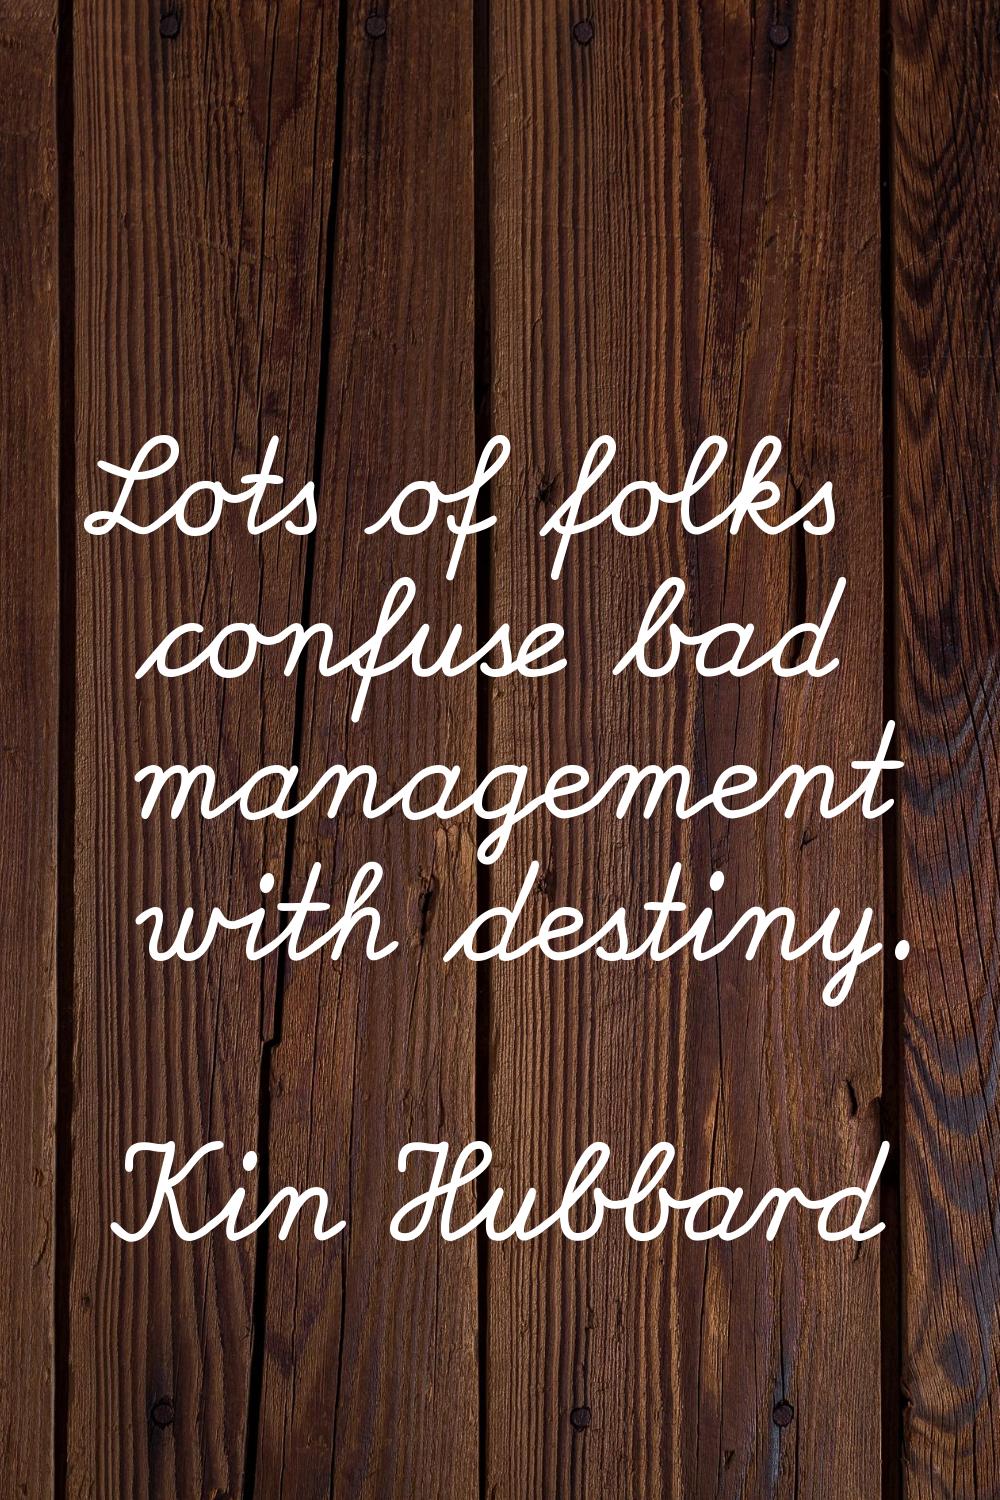 Lots of folks confuse bad management with destiny.